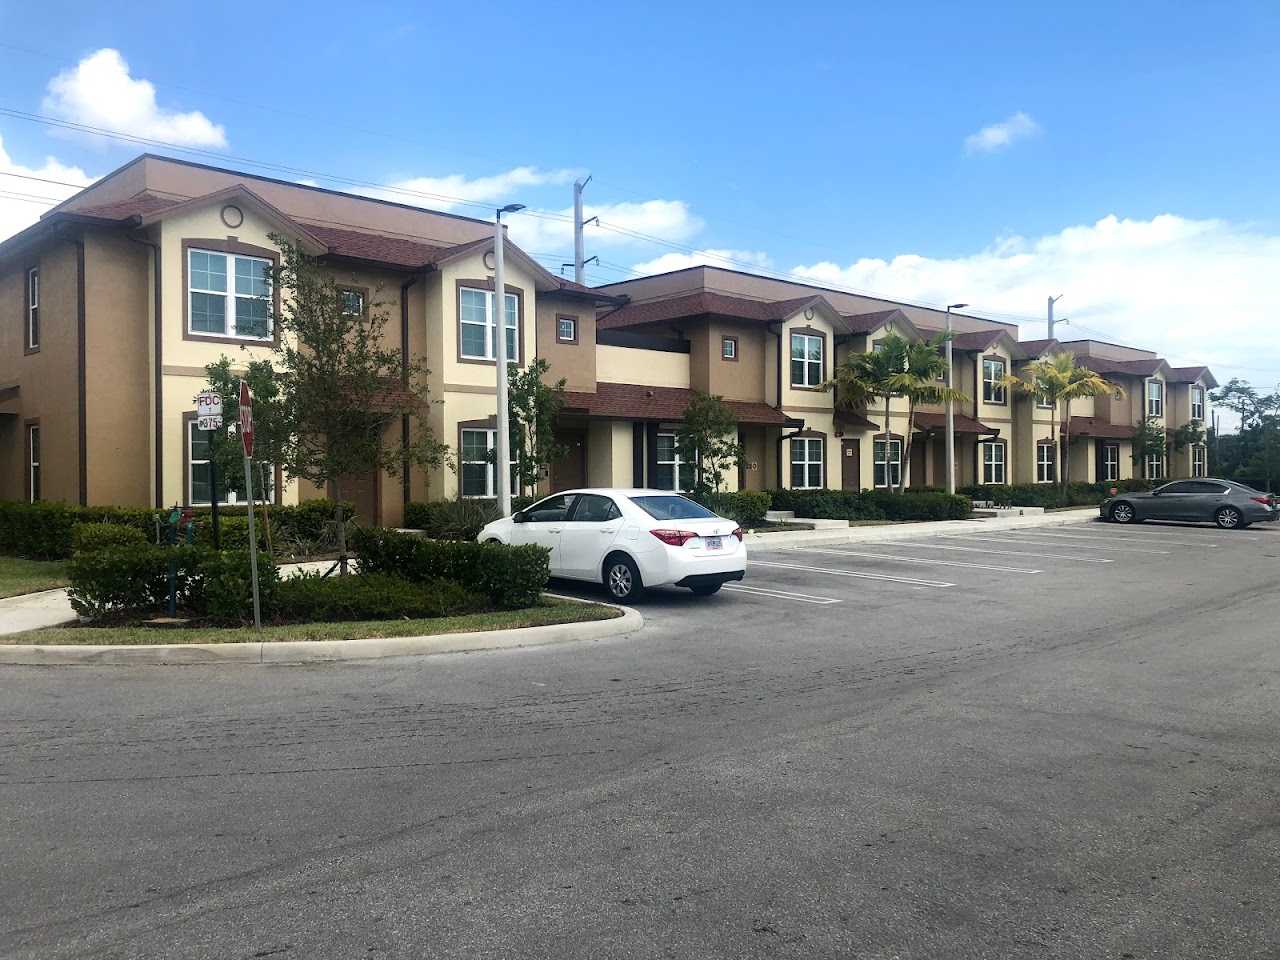 Photo of RESIDENCES AT CRYSTAL LAKE. Affordable housing located at 350 N.E. 32ND COURT POMPANO BEACH, FL 33064